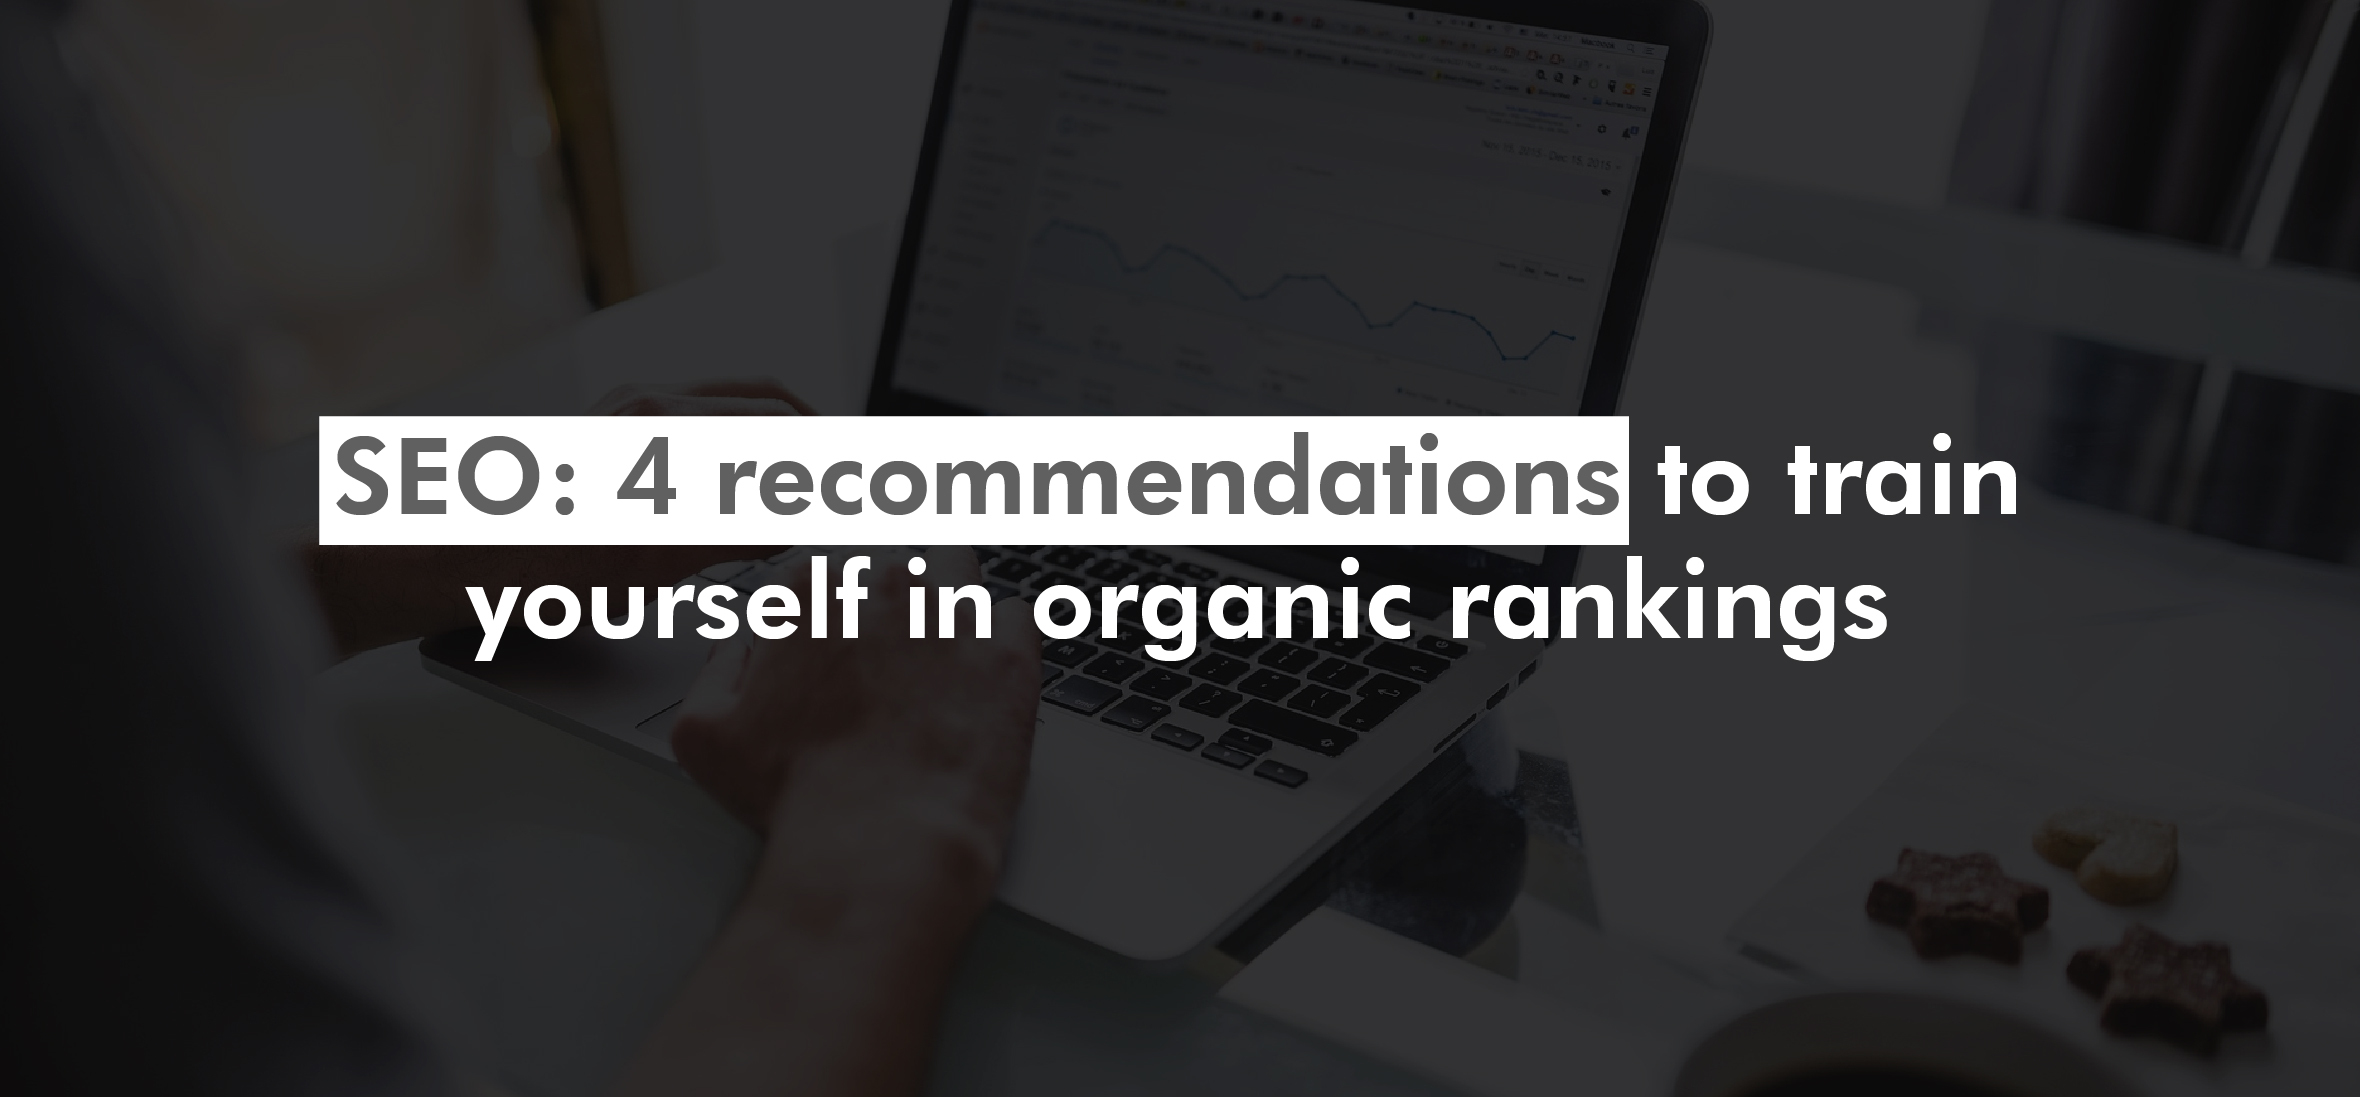 SEO: 4 recommendations to train yourself in organic rankings